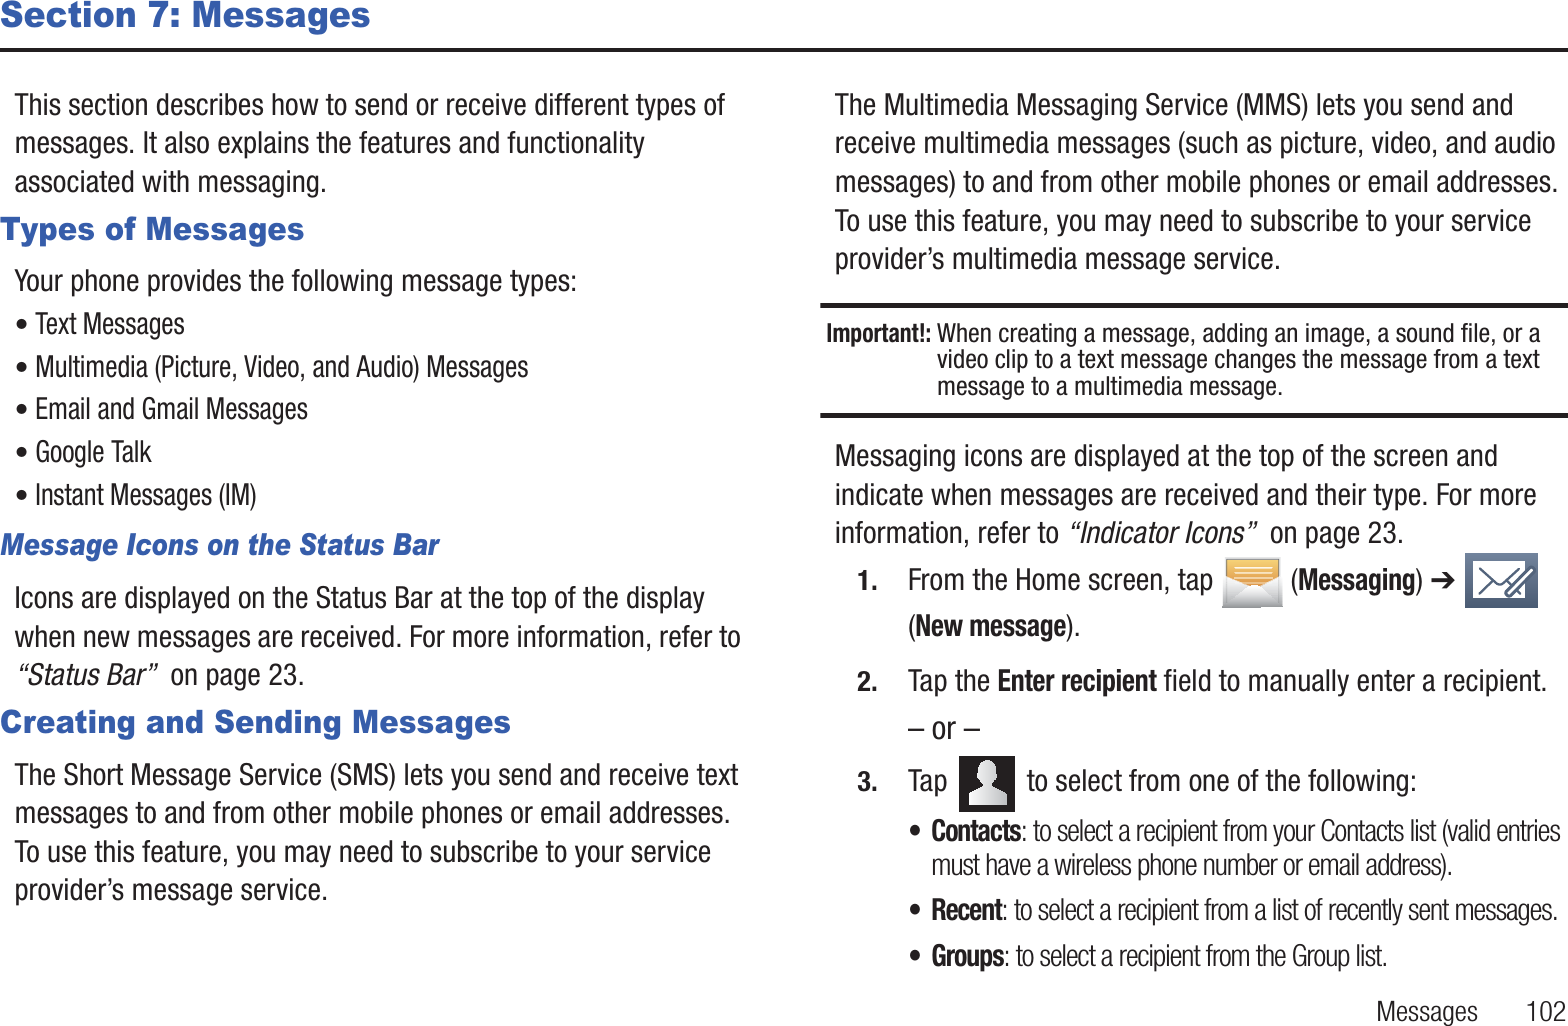 Messages       102Section 7: MessagesThis section describes how to send or receive different types of messages. It also explains the features and functionality associated with messaging.Types of MessagesYour phone provides the following message types:• Text Messages • Multimedia (Picture, Video, and Audio) Messages • Email and Gmail Messages• Google Talk• Instant Messages (IM)Message Icons on the Status BarIcons are displayed on the Status Bar at the top of the display when new messages are received. For more information, refer to “Status Bar”  on page 23.Creating and Sending MessagesThe Short Message Service (SMS) lets you send and receive text messages to and from other mobile phones or email addresses. To use this feature, you may need to subscribe to your service provider’s message service. The Multimedia Messaging Service (MMS) lets you send and receive multimedia messages (such as picture, video, and audio messages) to and from other mobile phones or email addresses. To use this feature, you may need to subscribe to your service provider’s multimedia message service.Important!: When creating a message, adding an image, a sound file, or a video clip to a text message changes the message from a text message to a multimedia message.Messaging icons are displayed at the top of the screen and indicate when messages are received and their type. For more information, refer to “Indicator Icons”  on page 23.1. From the Home screen, tap  (Messaging) ➔   (New message).2. Tap the Enter recipient field to manually enter a recipient.– or –3. Tap   to select from one of the following:• Contacts: to select a recipient from your Contacts list (valid entries must have a wireless phone number or email address).• Recent: to select a recipient from a list of recently sent messages.• Groups: to select a recipient from the Group list.